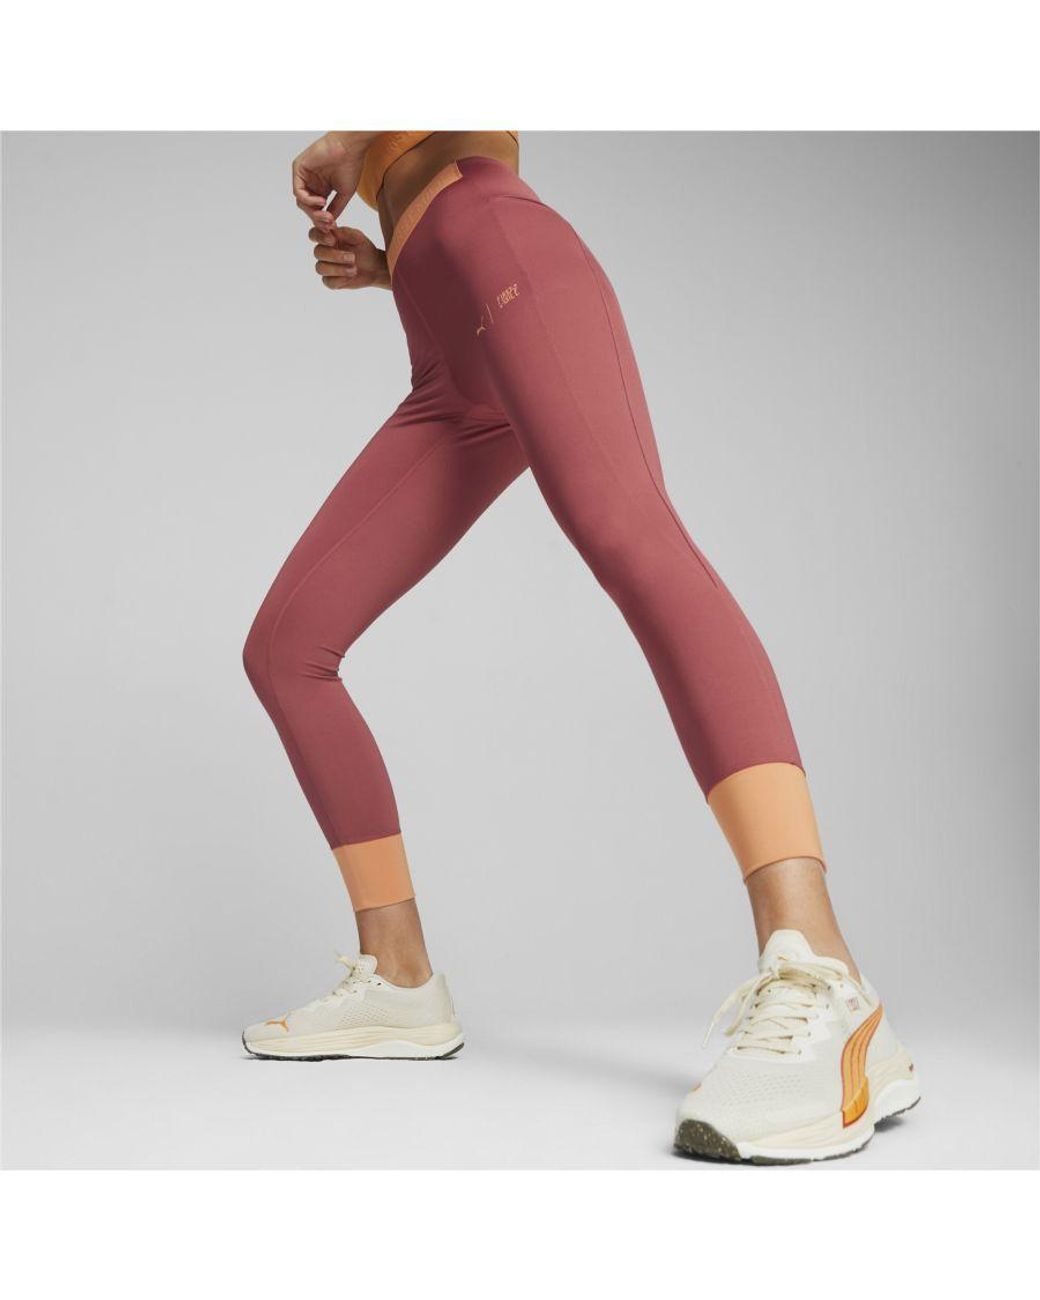 PUMA X First Mile 7/8 Running Leggings in Red